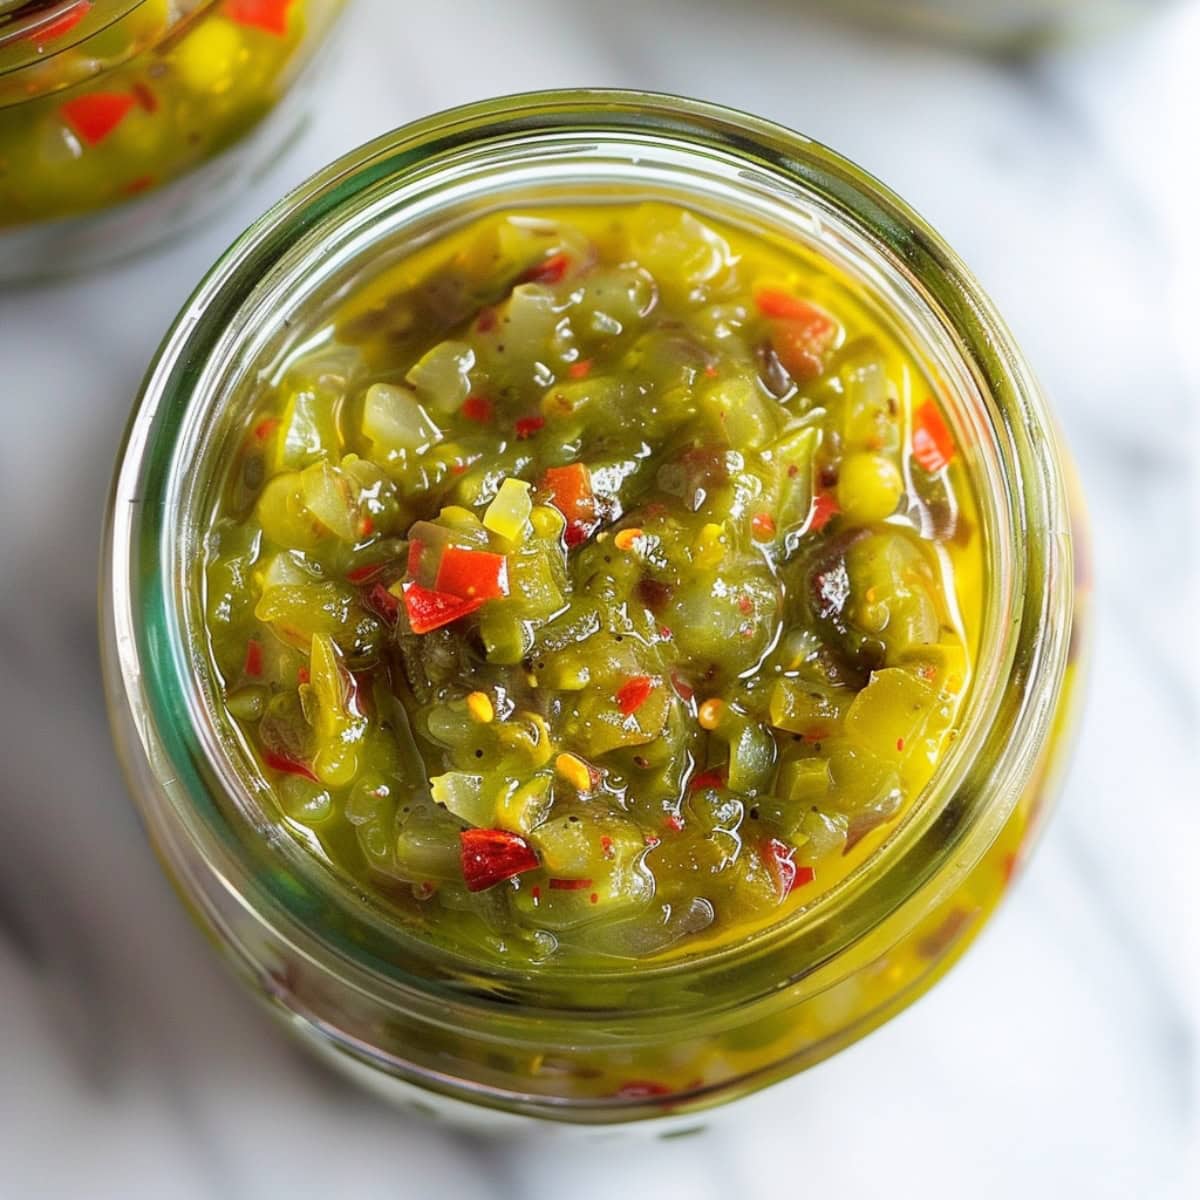 An open jar of homemade pepperoncini relish, with flecks of chopped red peppers